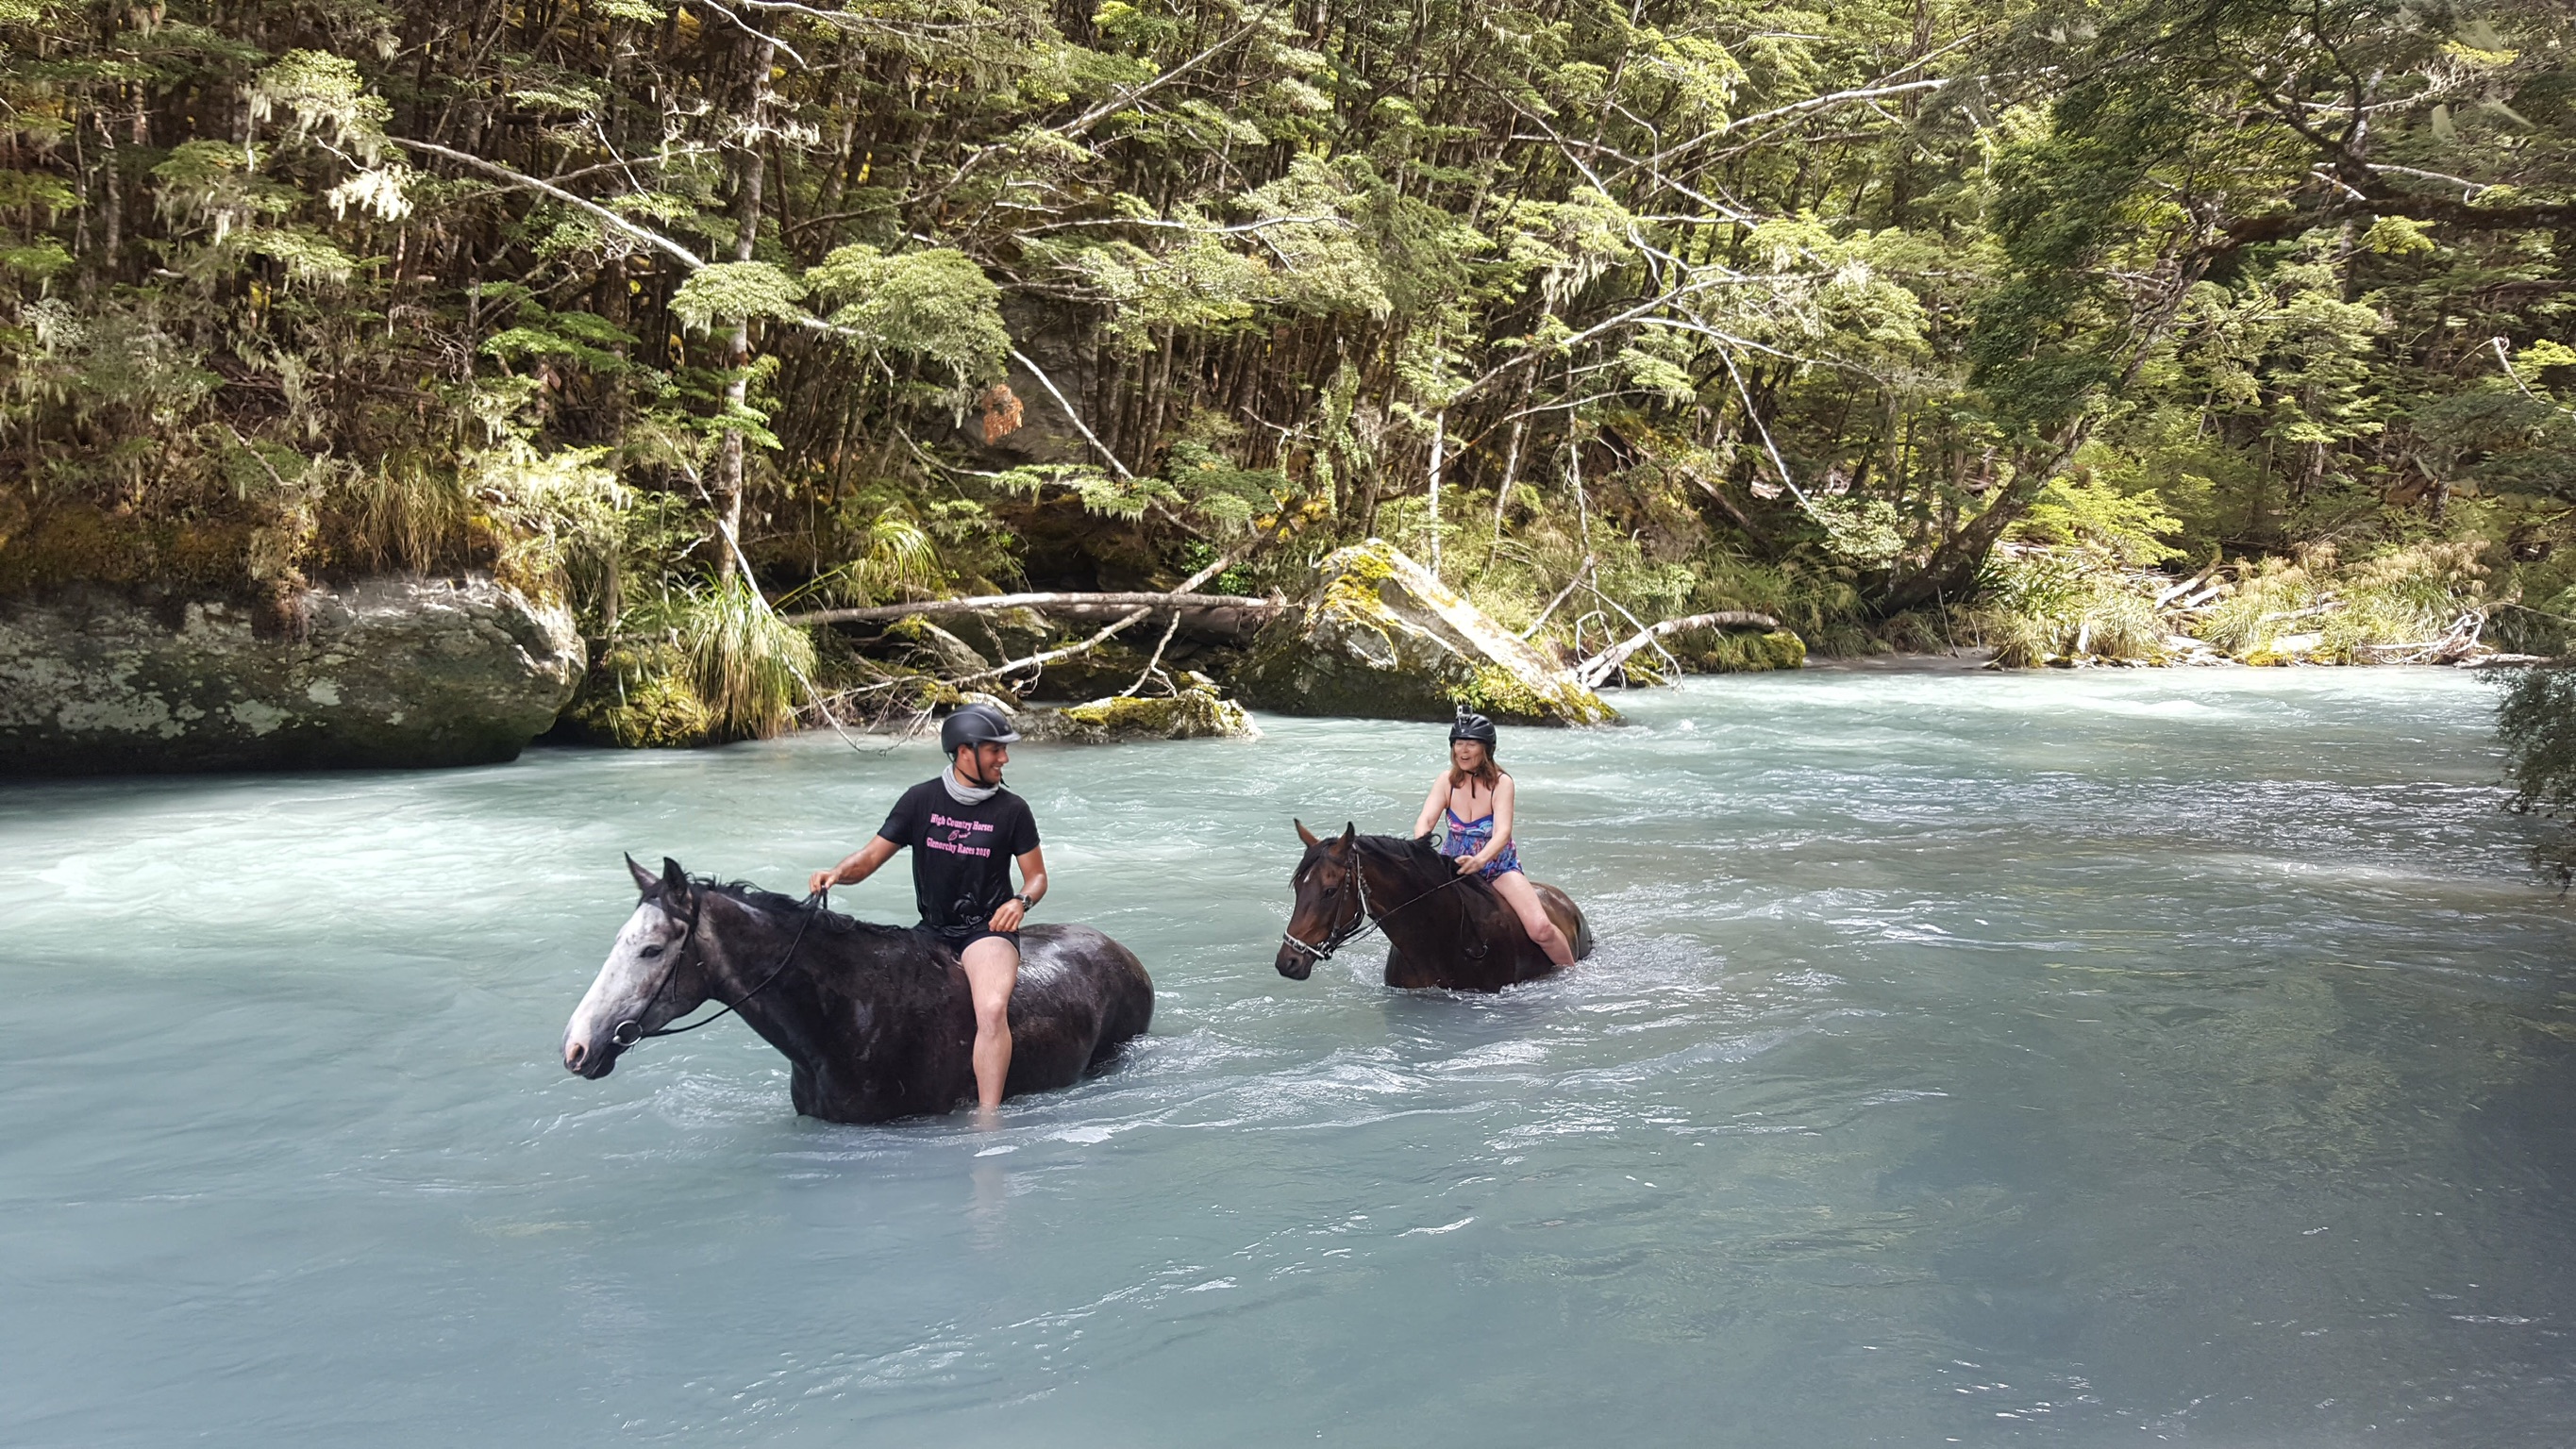 Swimming bareback in glacier waters. It was an amazing feeling having a horse float underneath me in the freezing cold water.